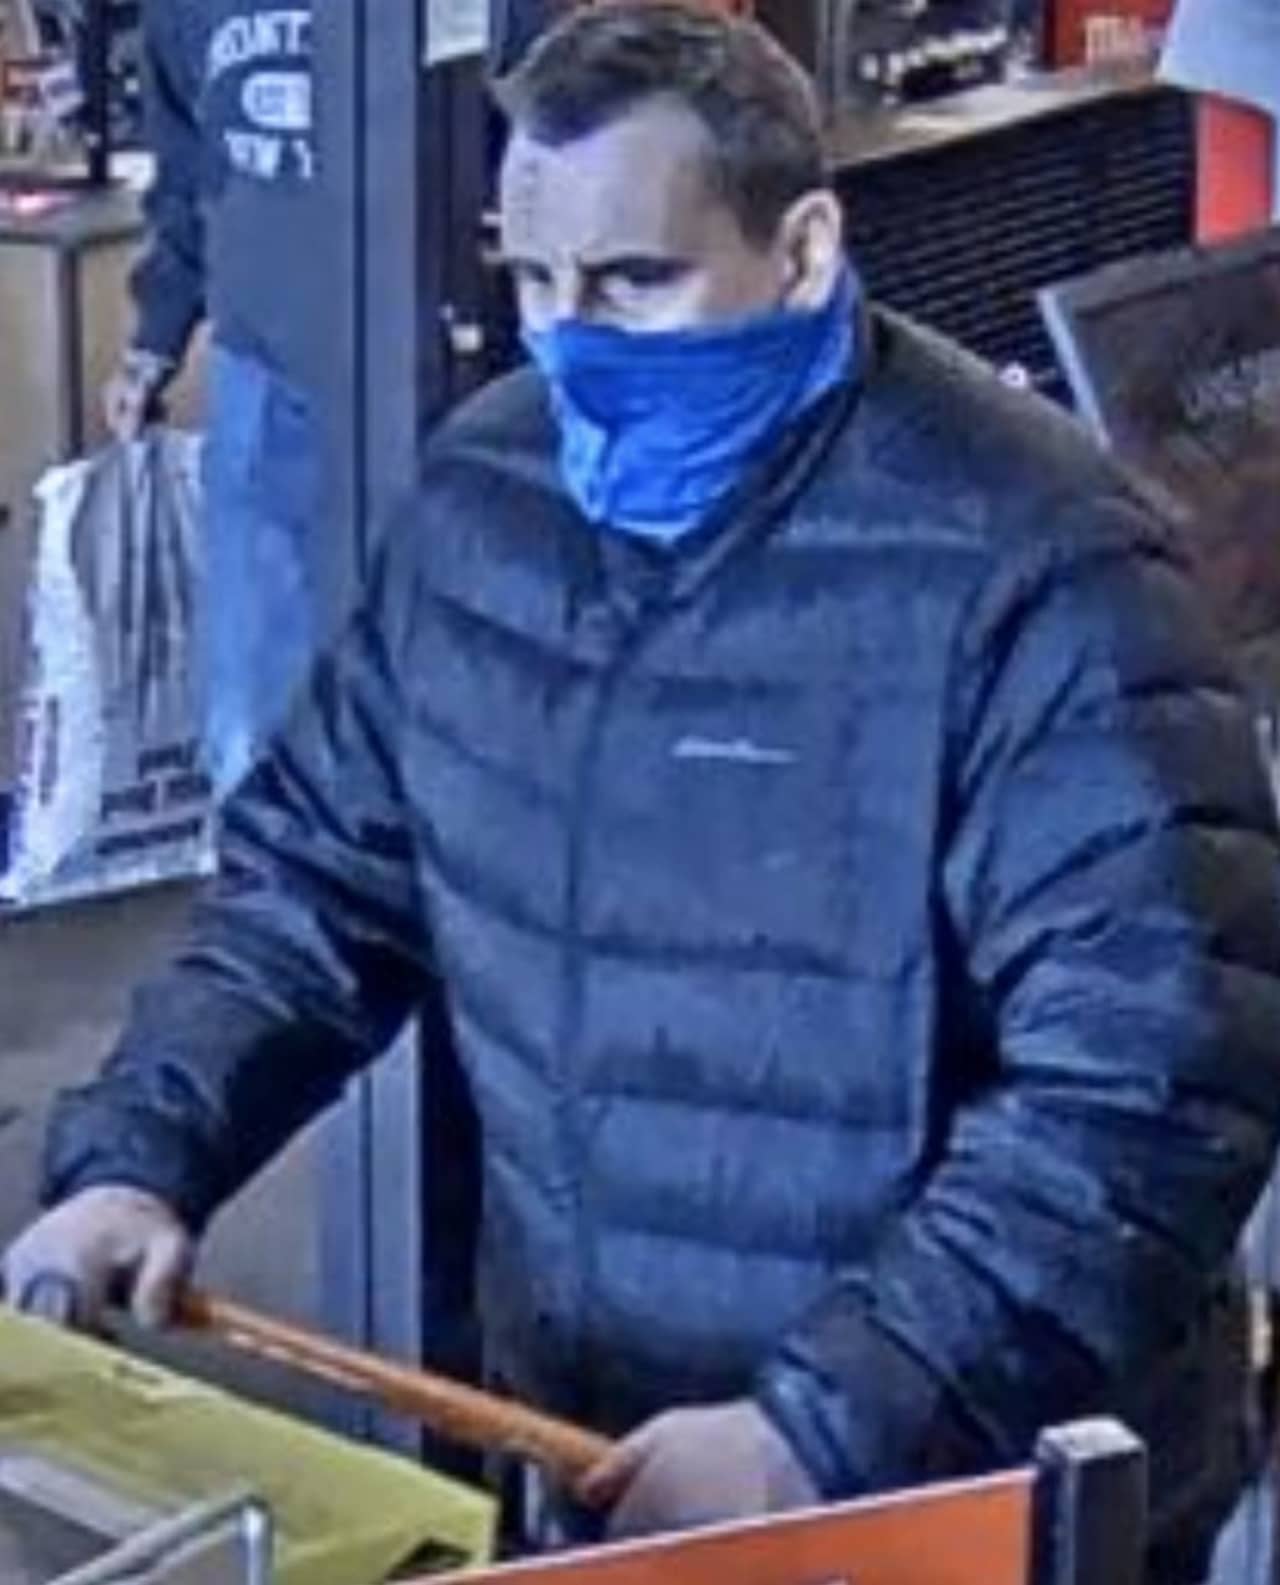 A man is wanted in Suffolk County after allegedly stealing a power washer from Home Depot on Long Island.